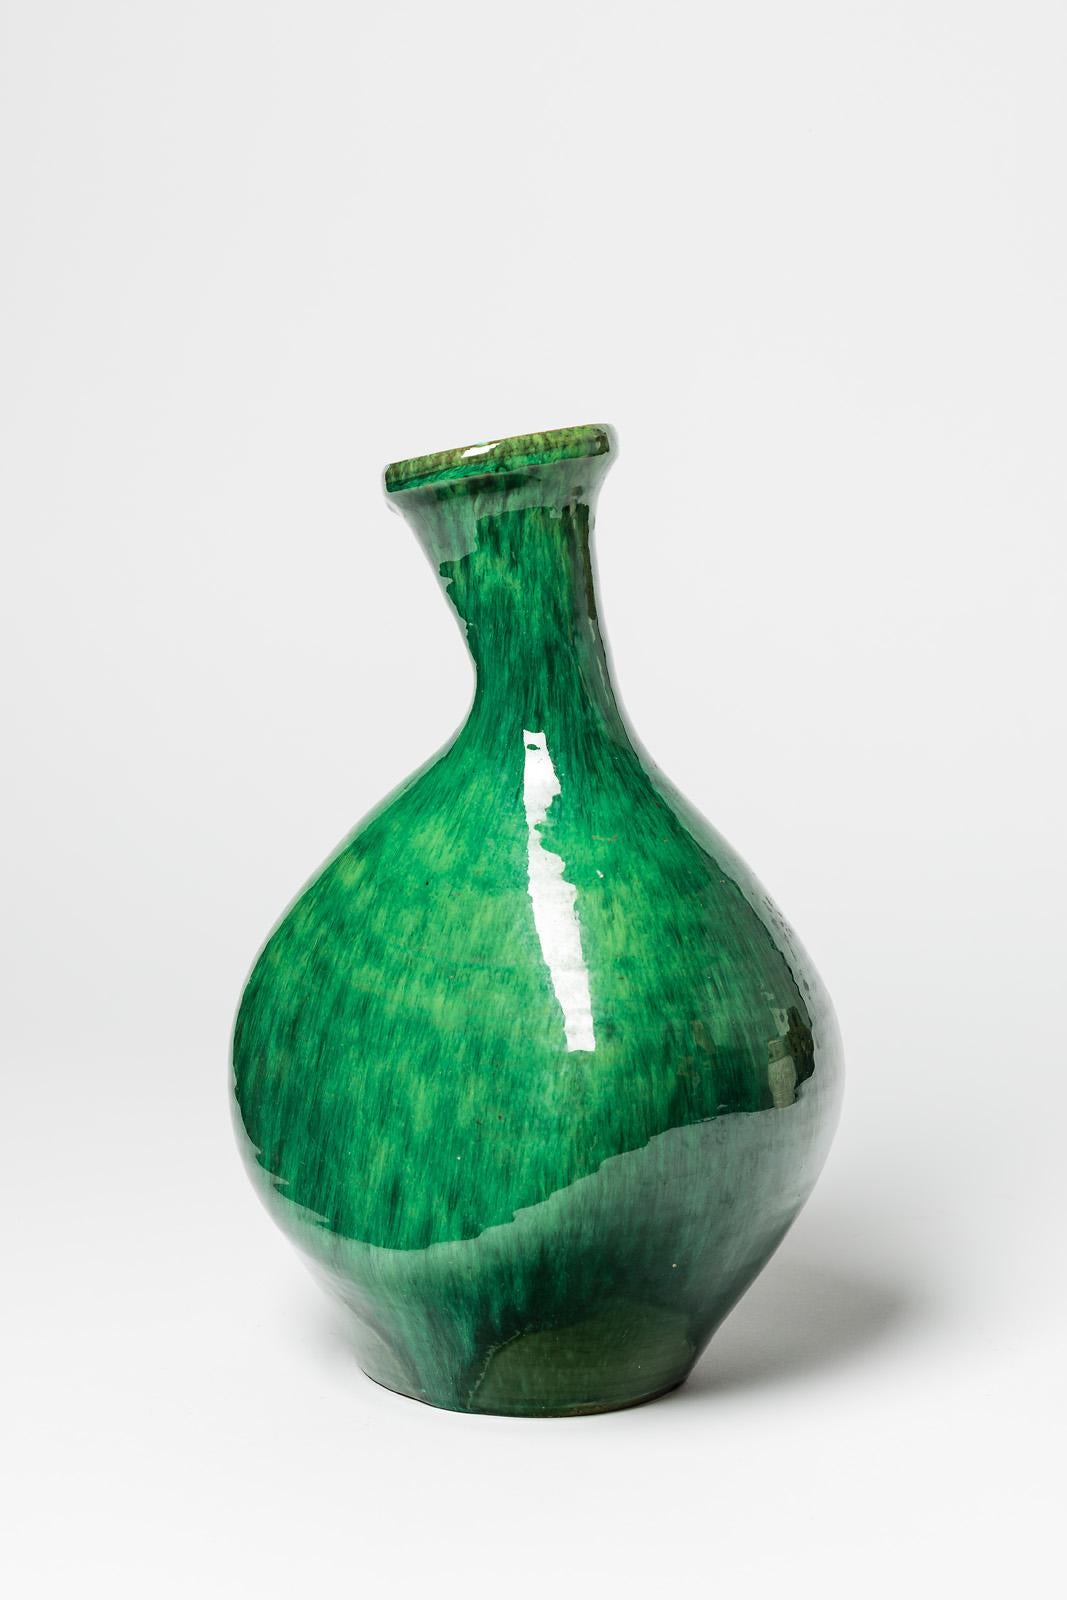 20th Century Green and White Free Form Ceramic Vase circa 1950 French Design Style of Madoura For Sale